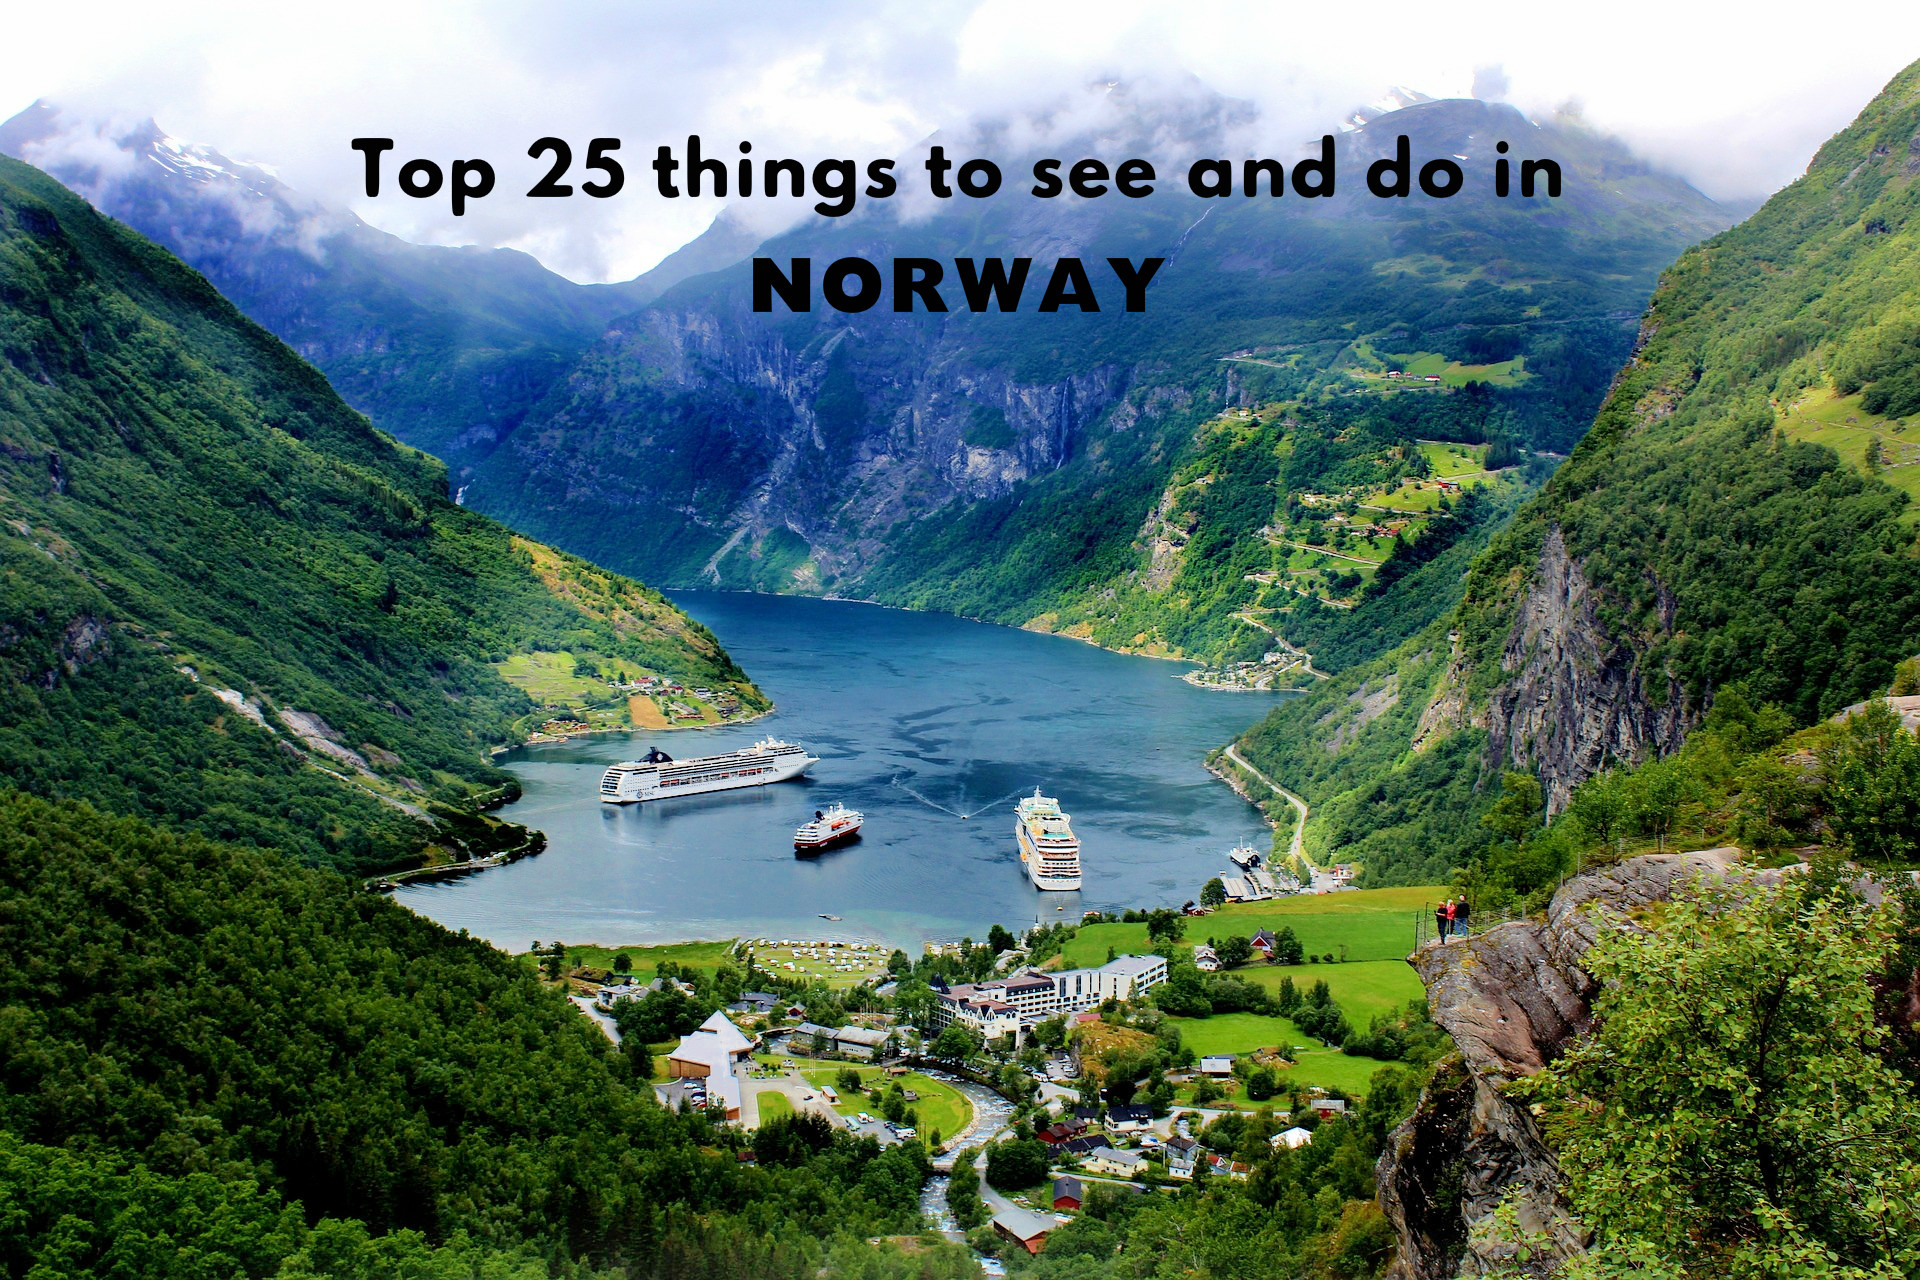 Geirangerfjord - Top 25 things to see and do in #Norway #travel #Europe